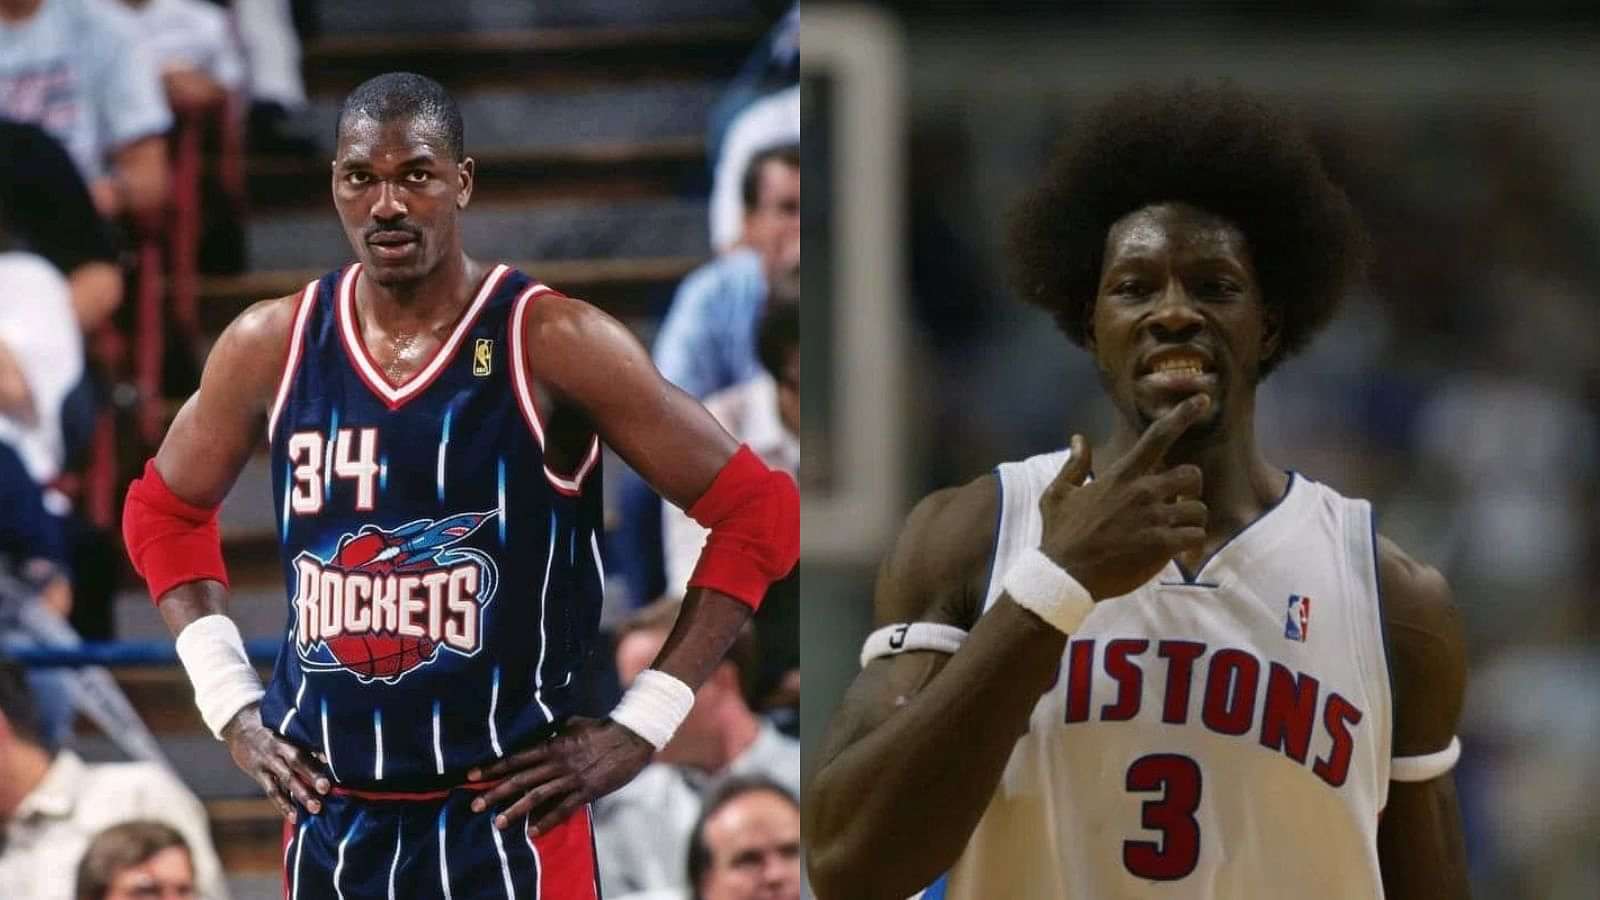 Saint Rose basketball faced Ben Wallace on his way to the Hall of Fame